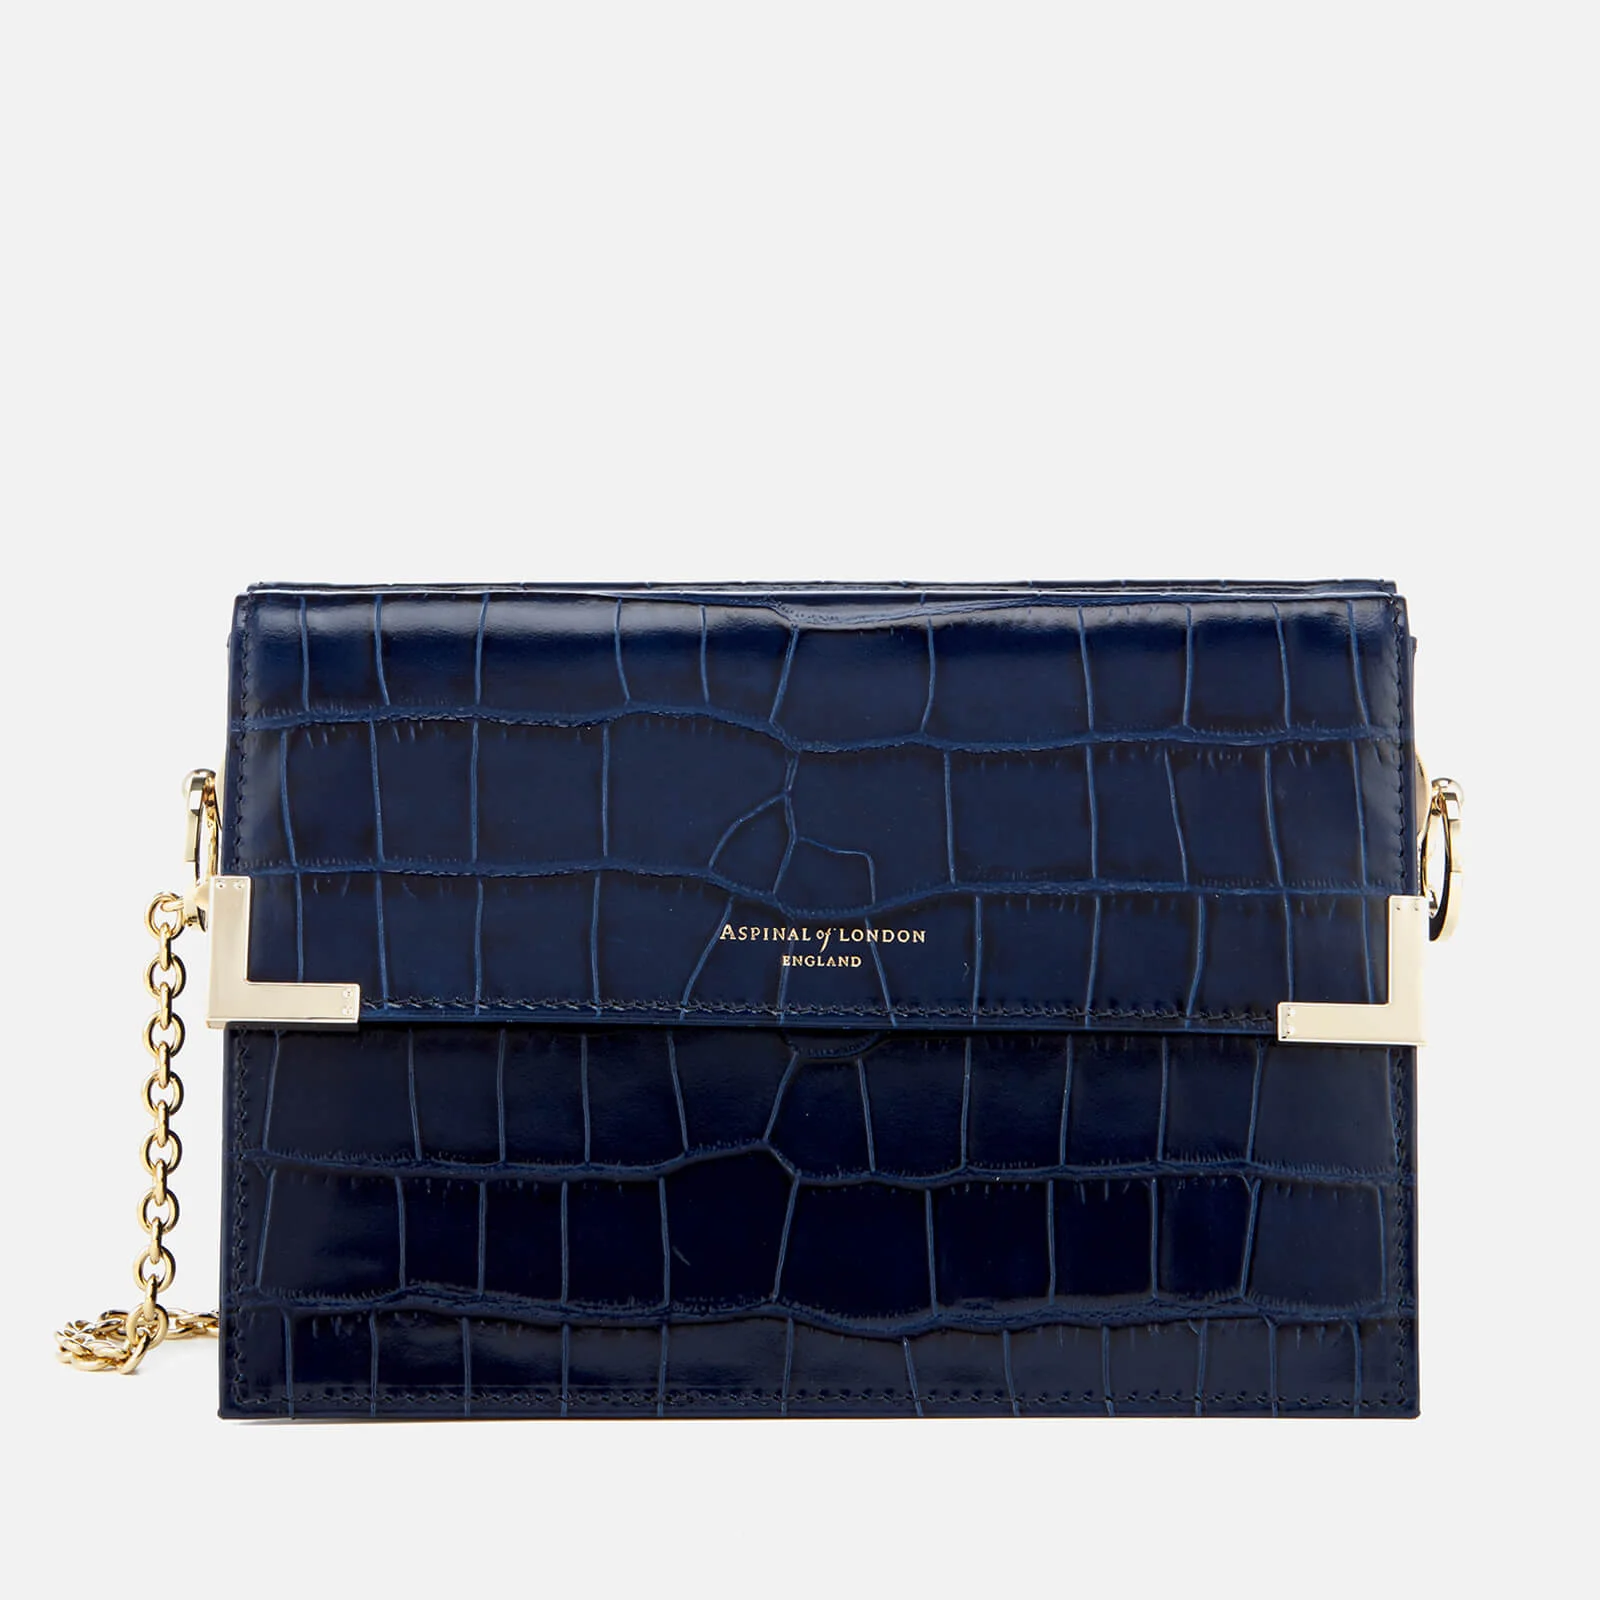 Aspinal of London Women's Chelsea Bag - Navy Image 1